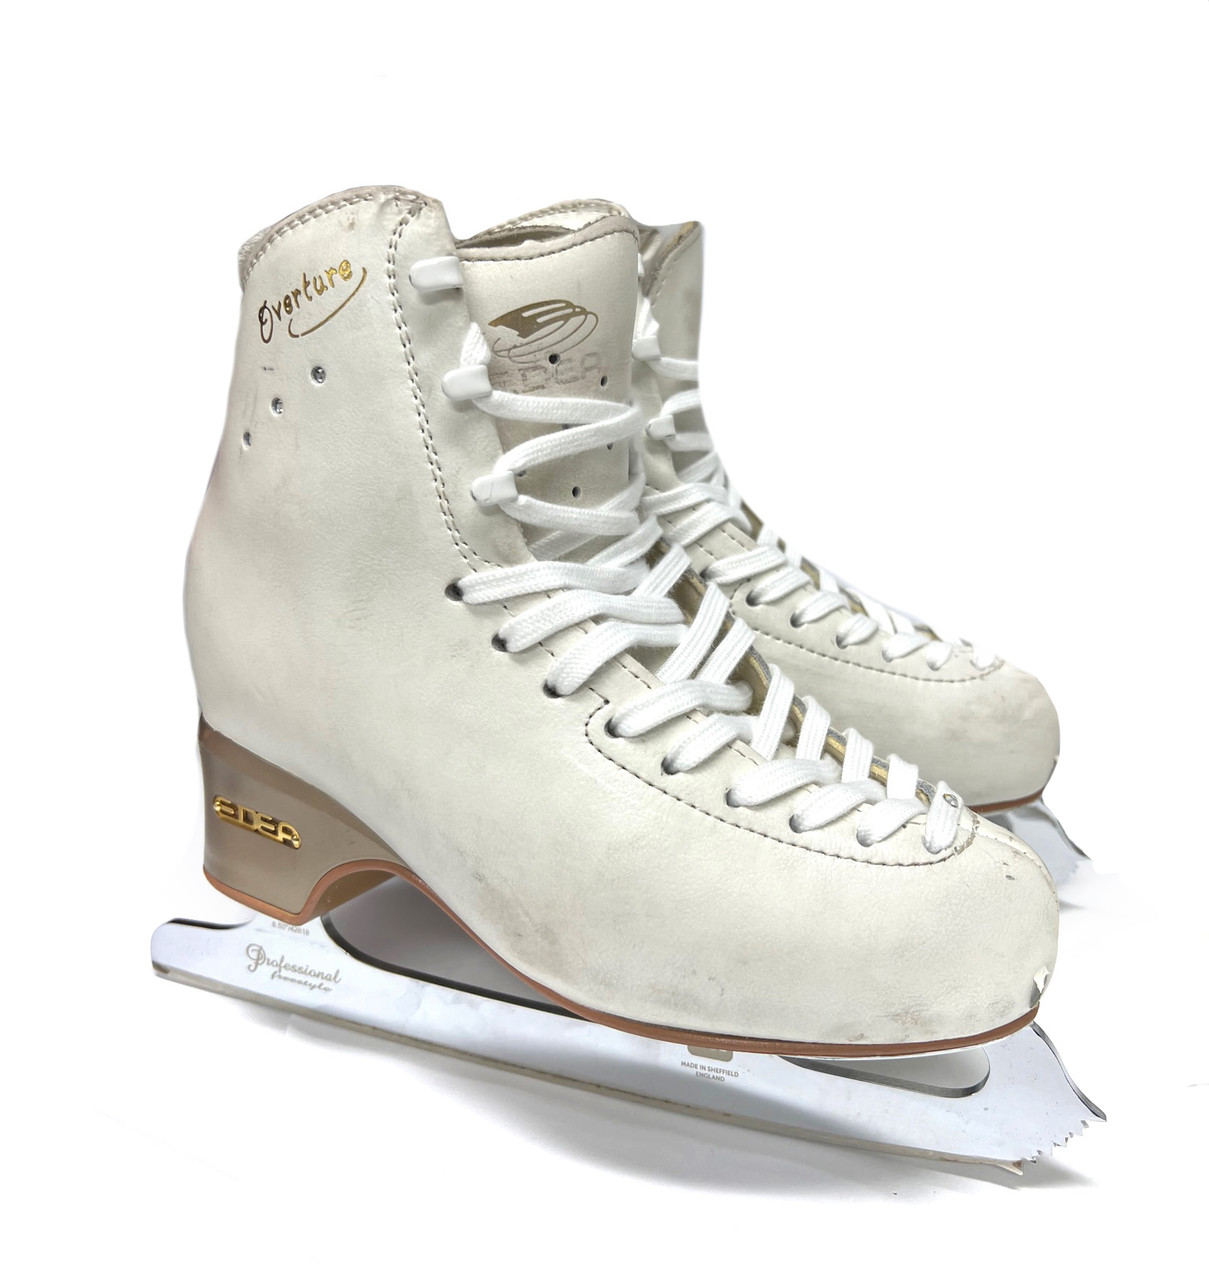 Edea OVERTURE Ice Skates with MK Blades Professional- Size 230 Only (Used) 